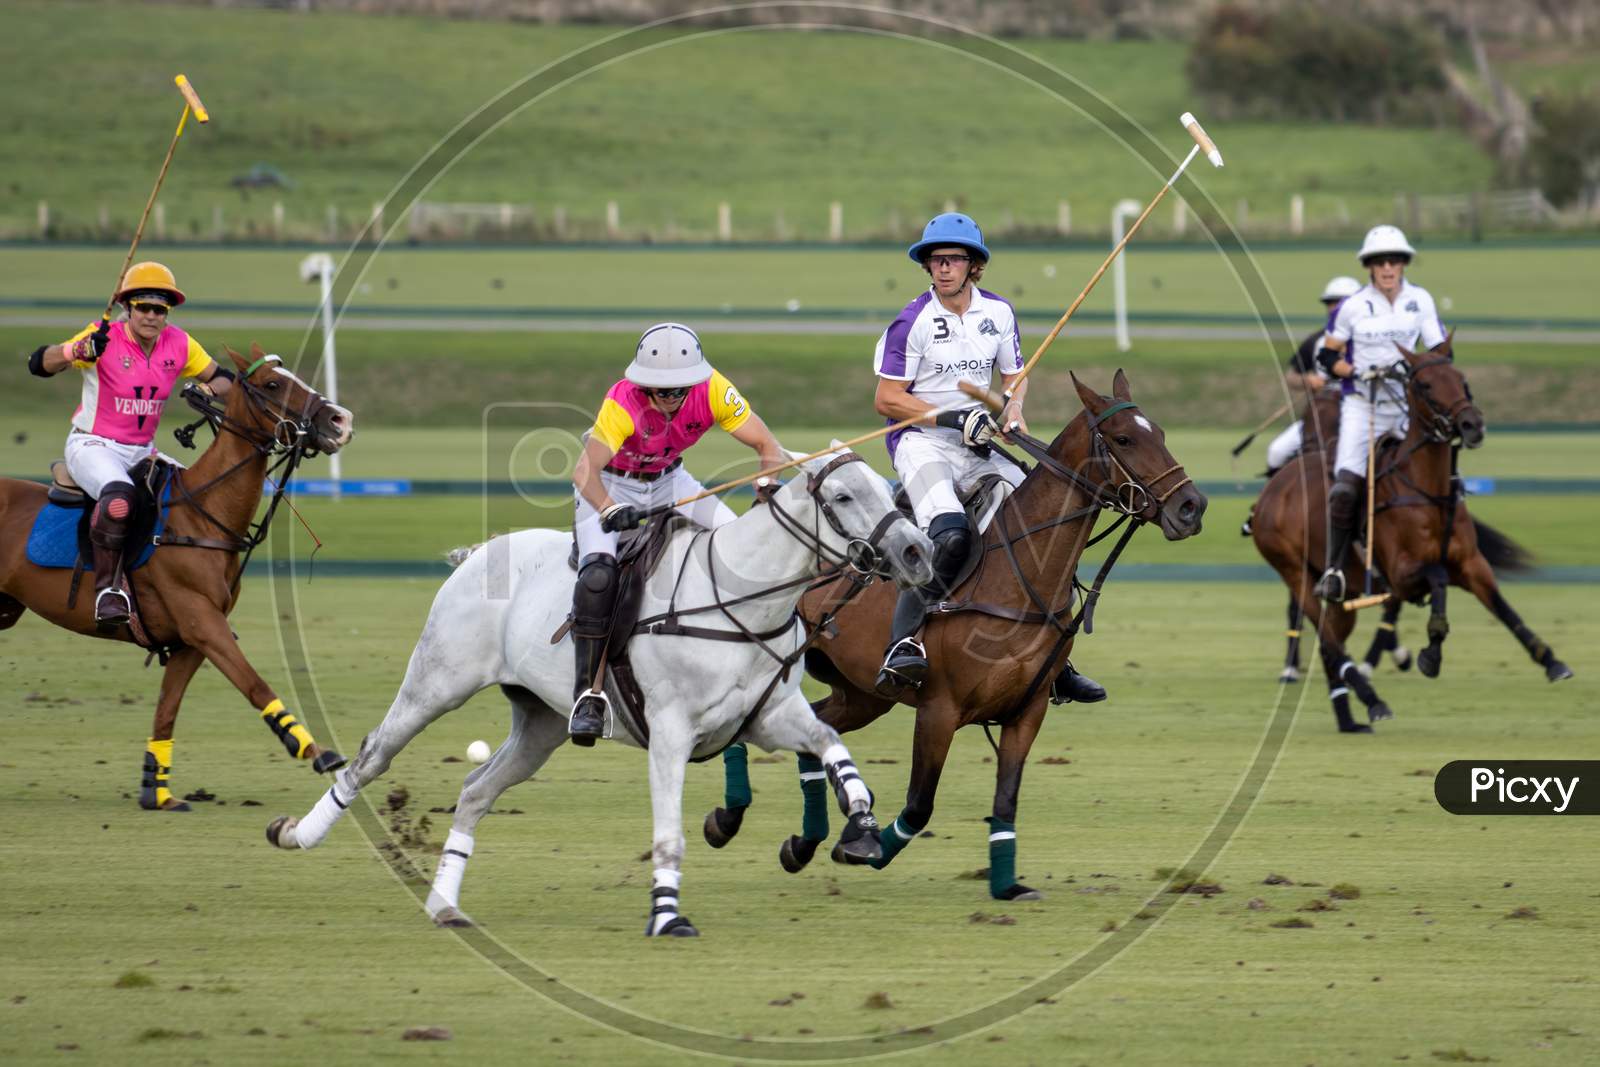 Midhurst, West Sussex/Uk - September 1 : Playing Polo In Midhurst, West Sussex On September 1, 2020.  Unidentified People